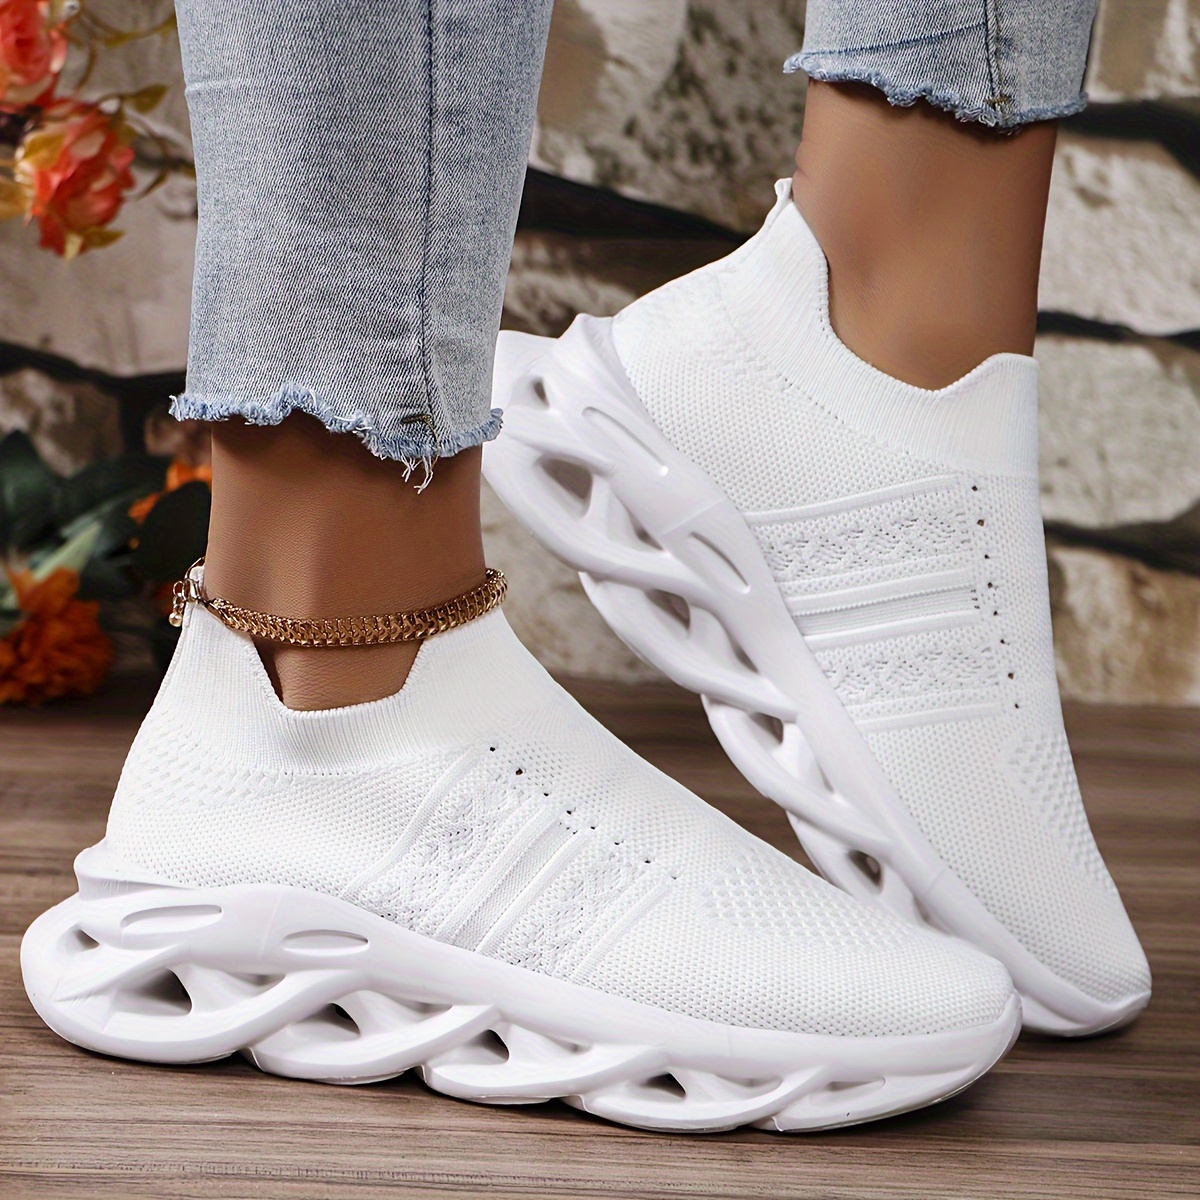 

Women's Solid Color Platform Sneakers, Breathable Flying Woven Outdoor Shoes, Comfortable Low Top Shoes